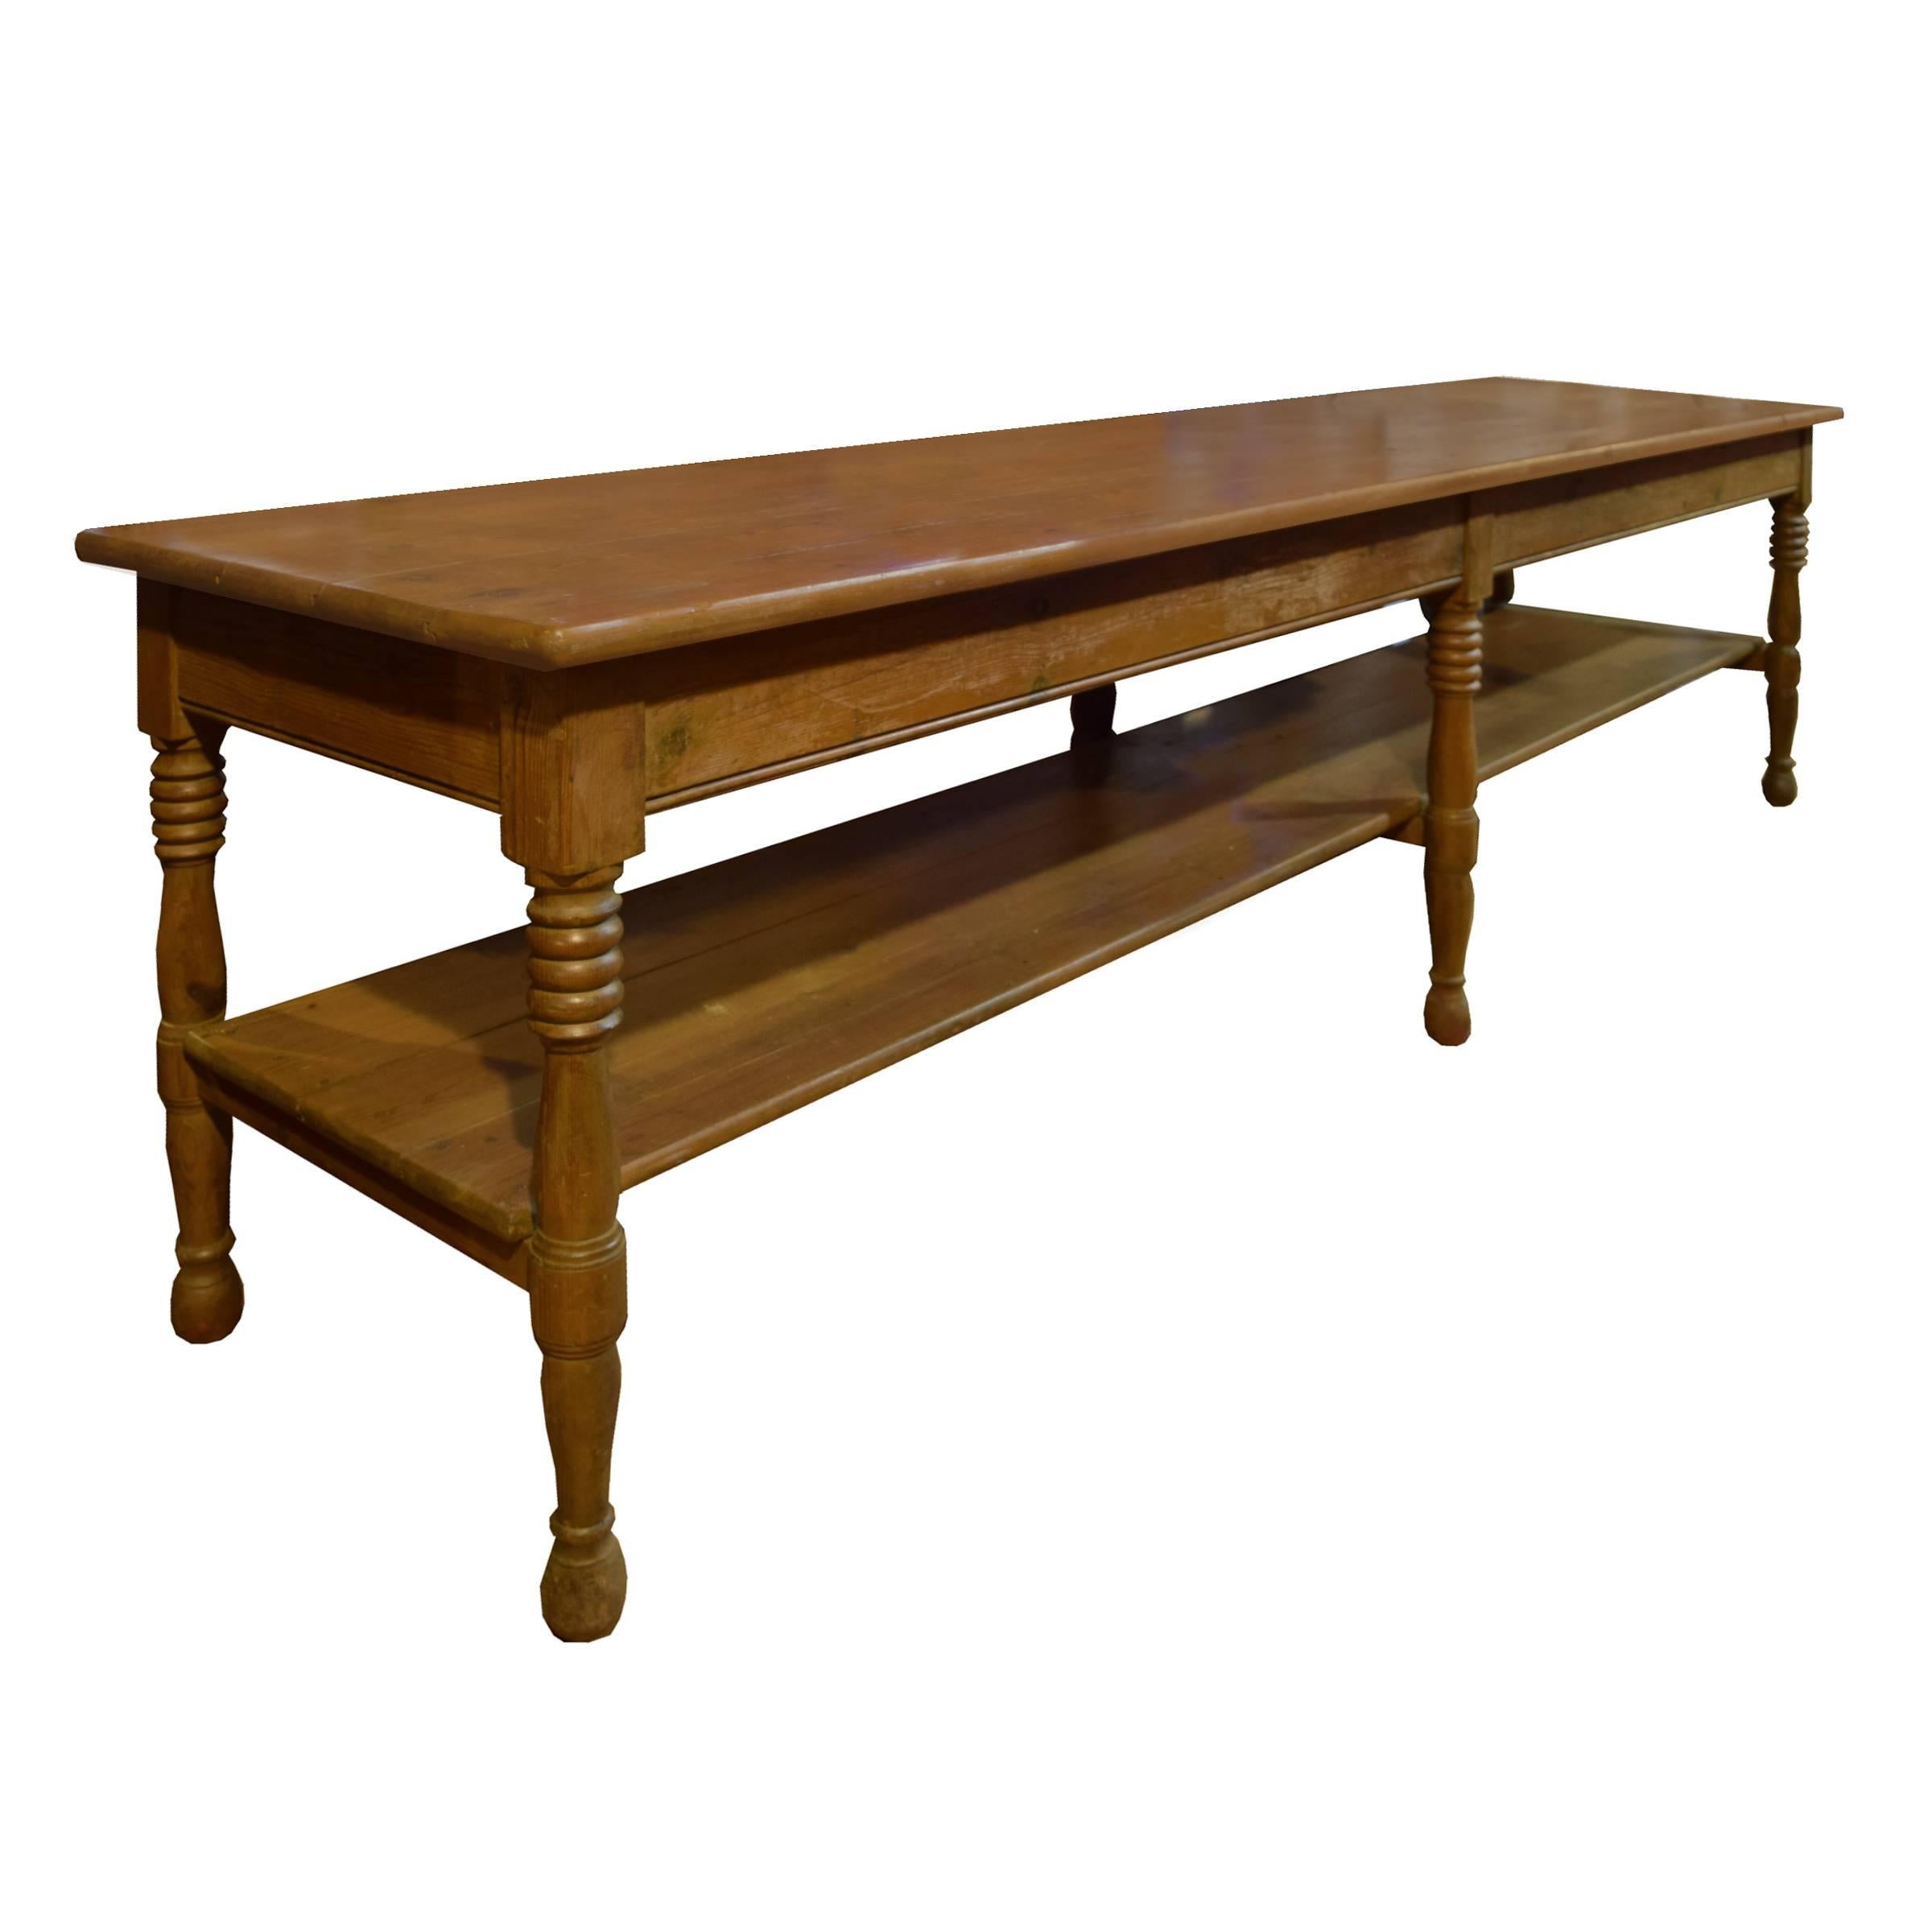 A beautiful French oak draper's table with one drawer, a lower shelf, and six wonderfully turned legs, circa 1900.
